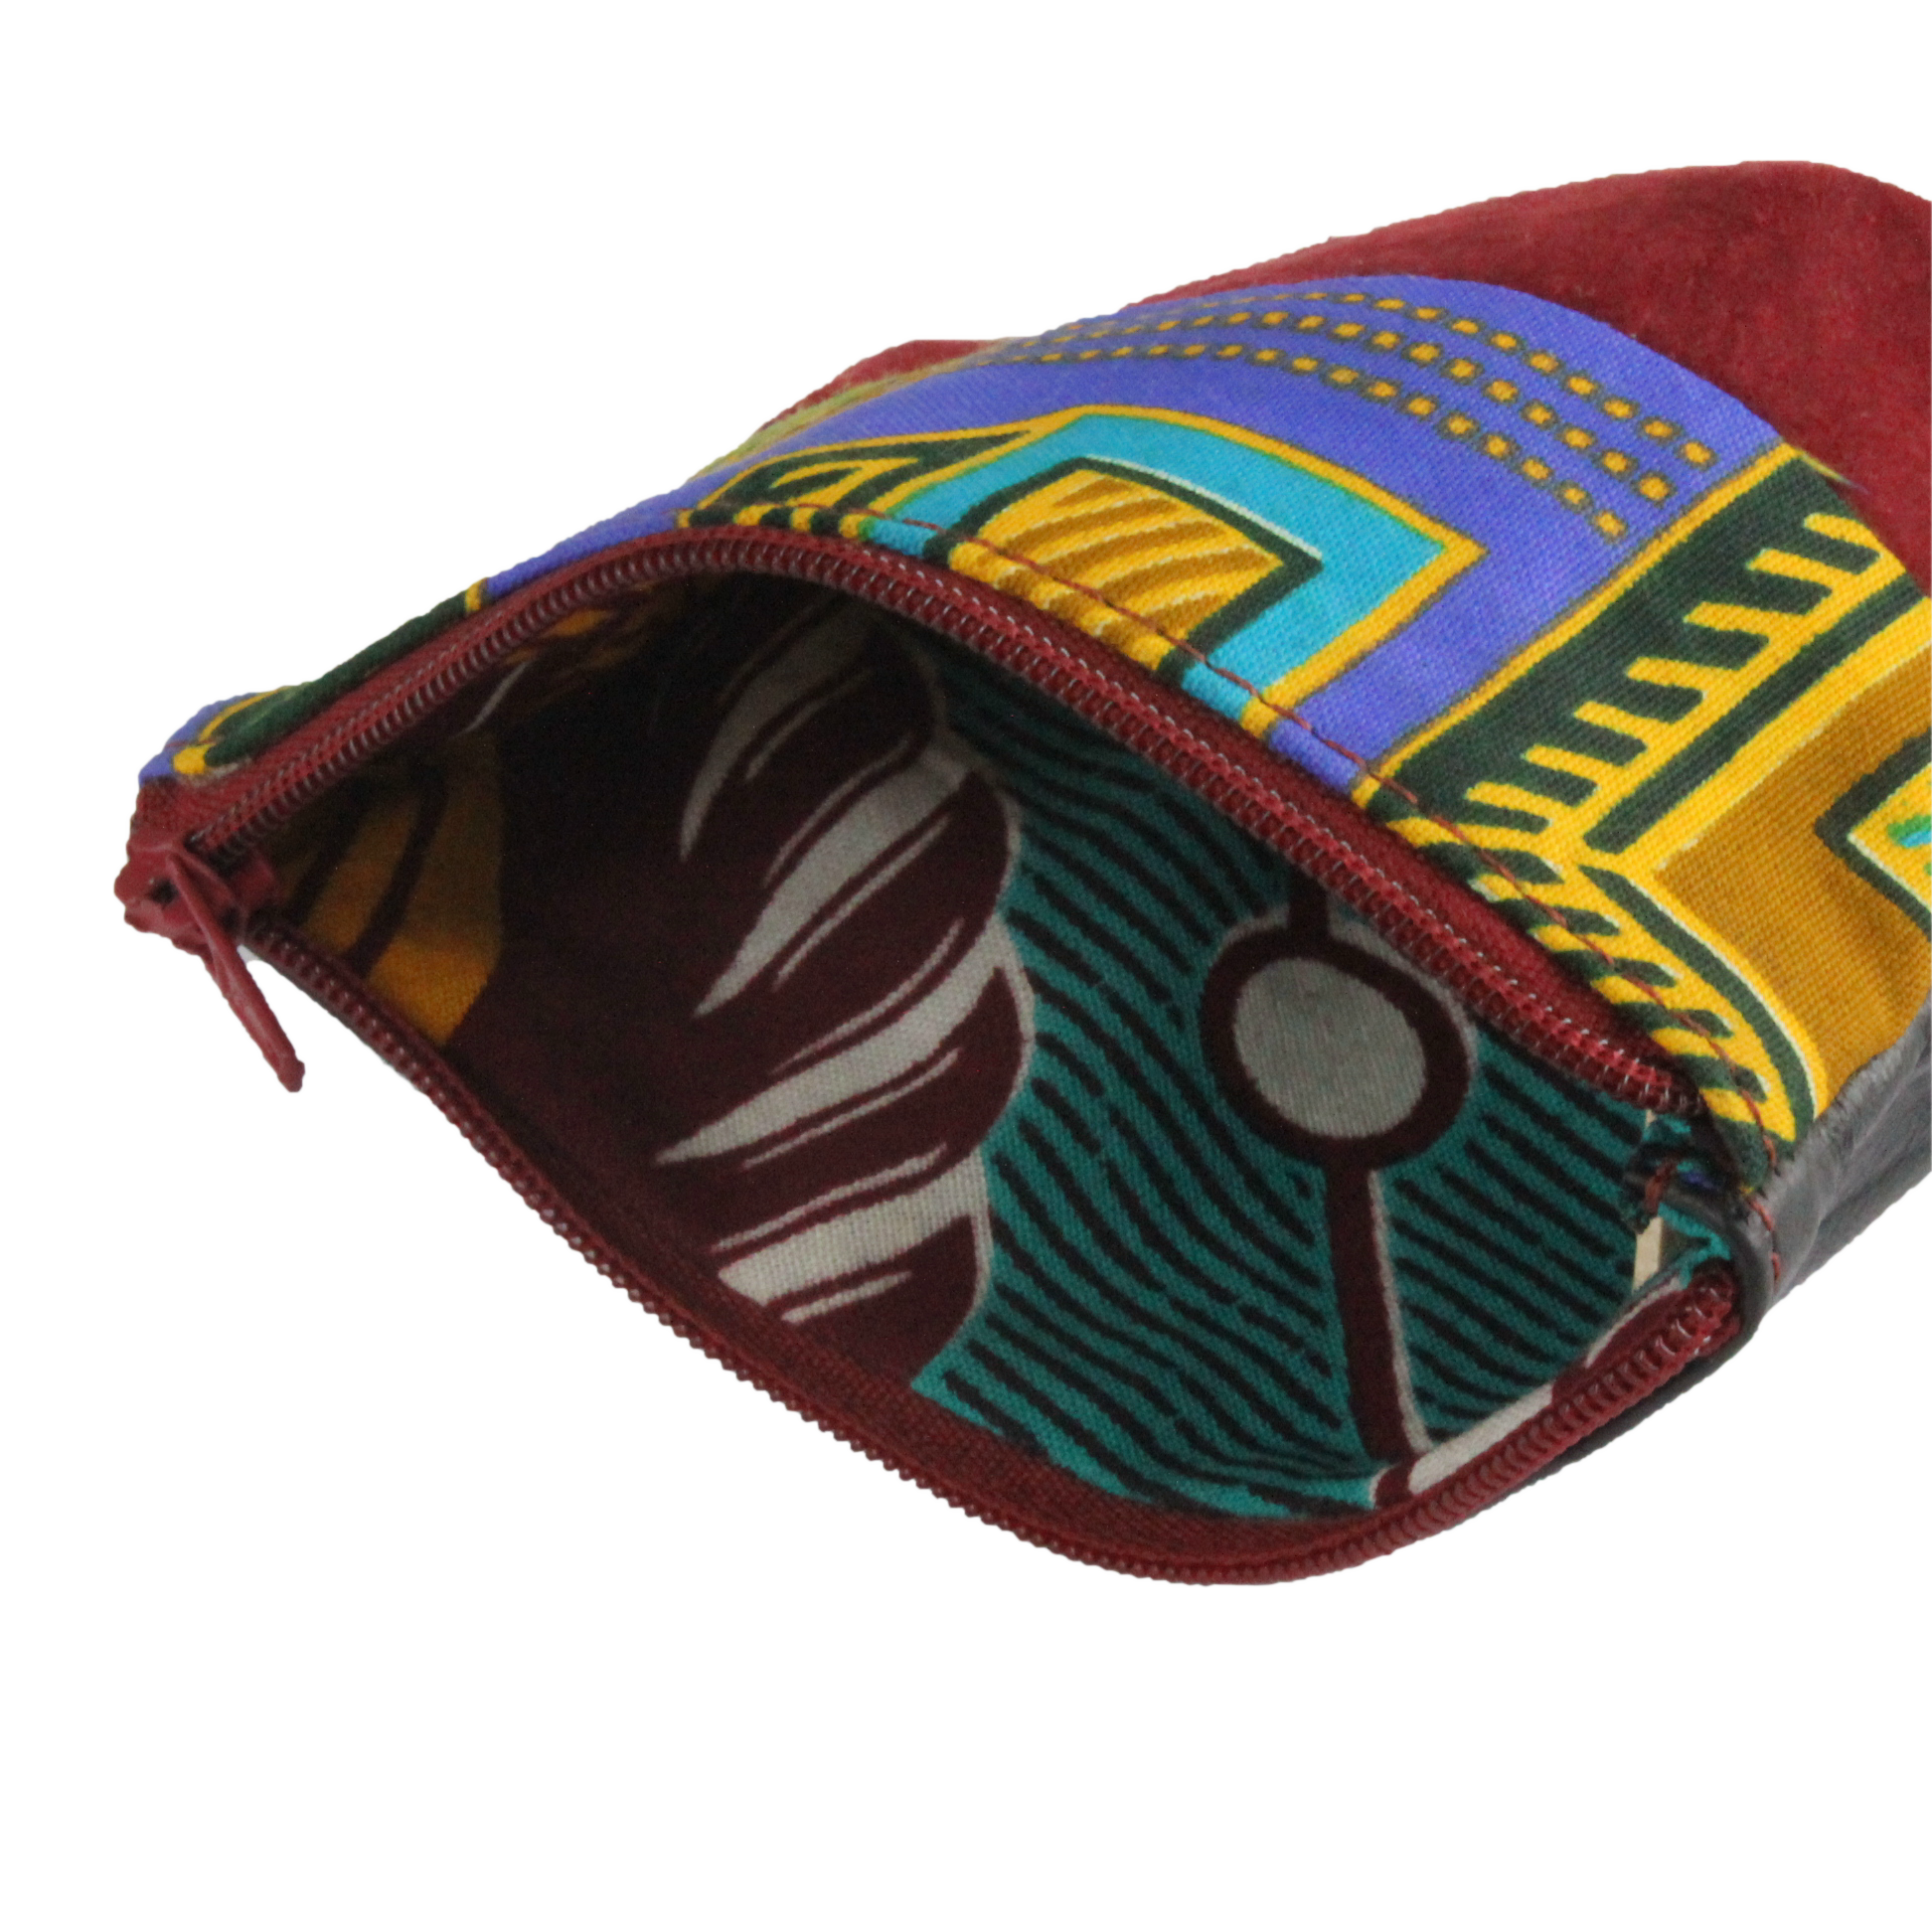 Handmade African coin purse, upcycled leather, African print, Kitenge fashion, Ankara fashion, turquoise lining